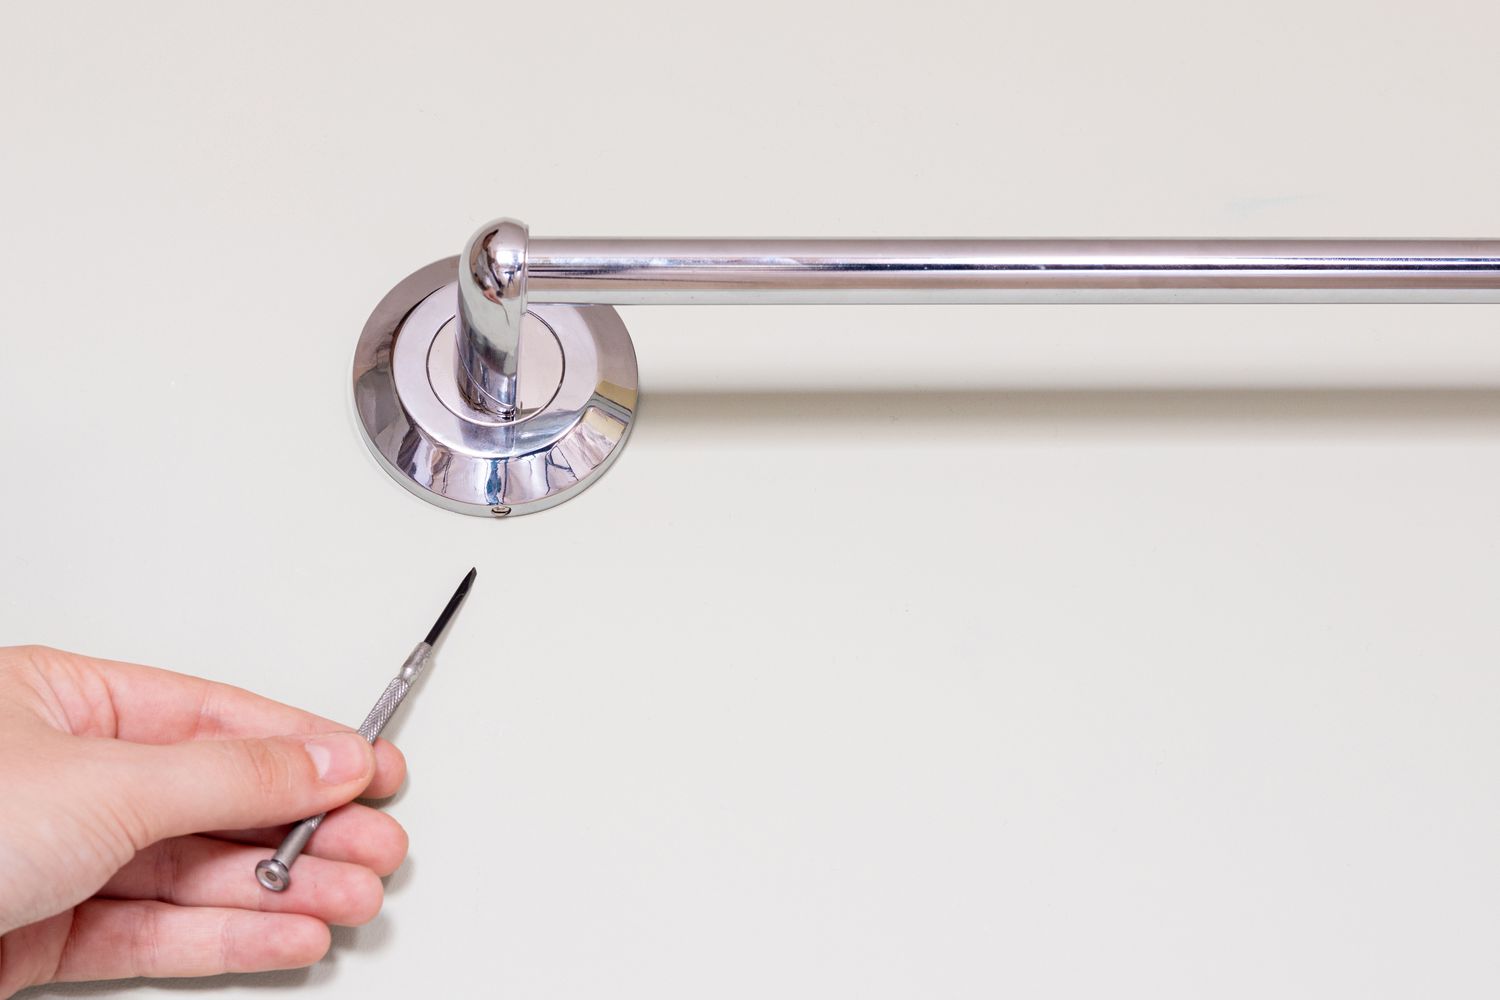 How To Fix A Towel Bar That Is Loose